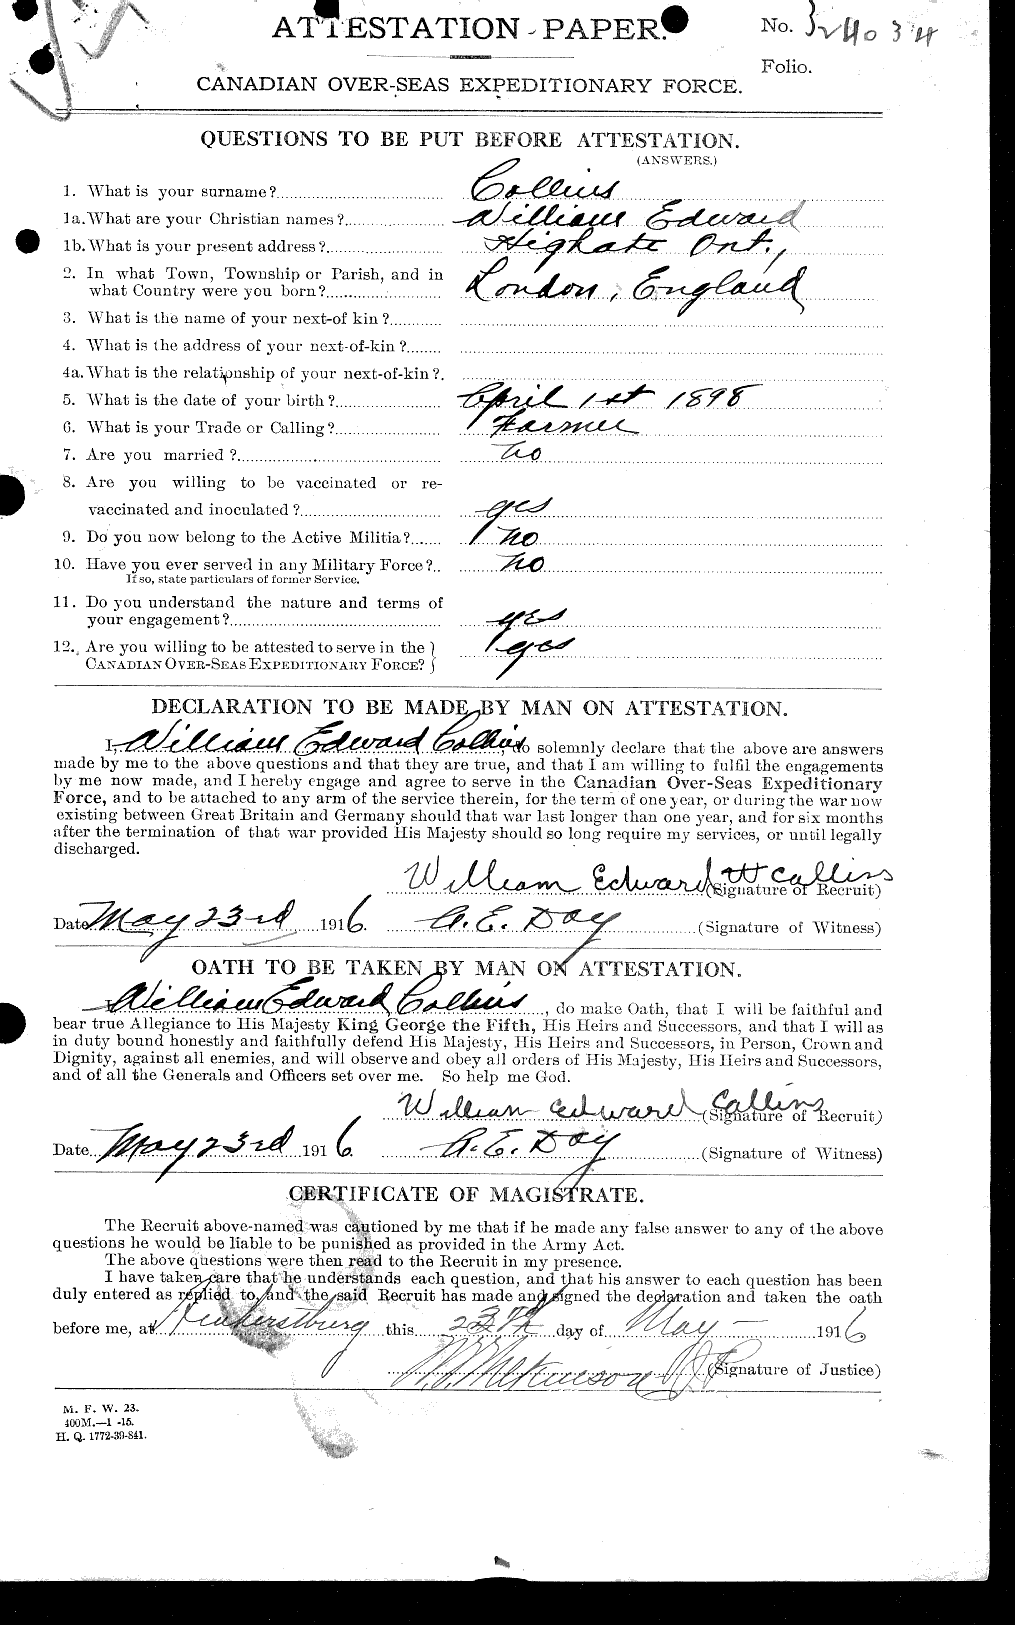 Personnel Records of the First World War - CEF 034597a